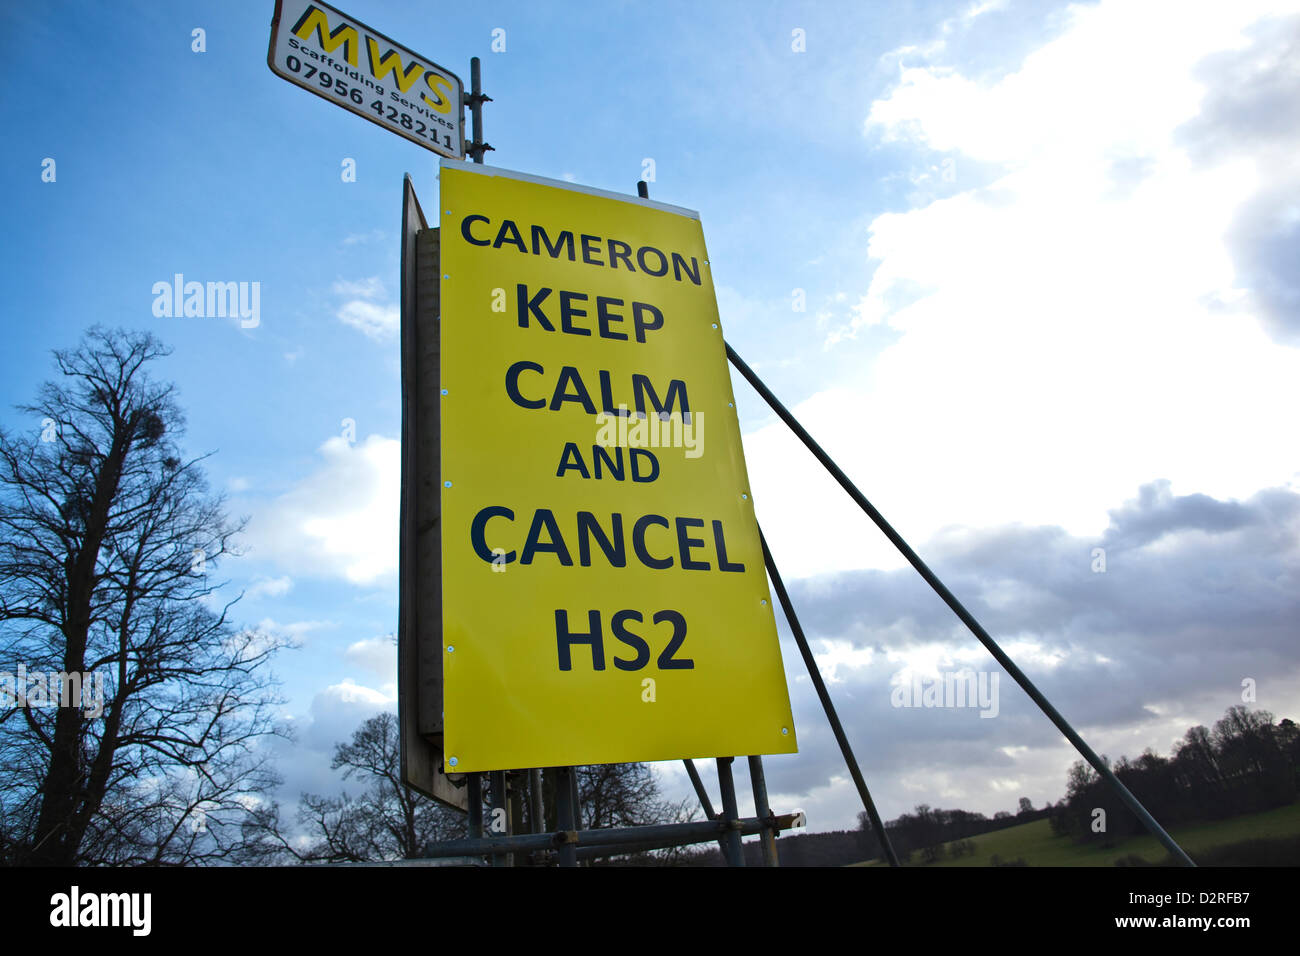 High-Speed Rail (HS2) Amersham, Buckinghamshire, UK. 31.01.2013 Campaigners representing 'Stop HS2' have put up signs along the A413 roadside calling for the proposed high-speed rail 2 tunnel network running through the countryside to be stopped as opposition grows in the Chilton district of Buckinghamshire. Stock Photo